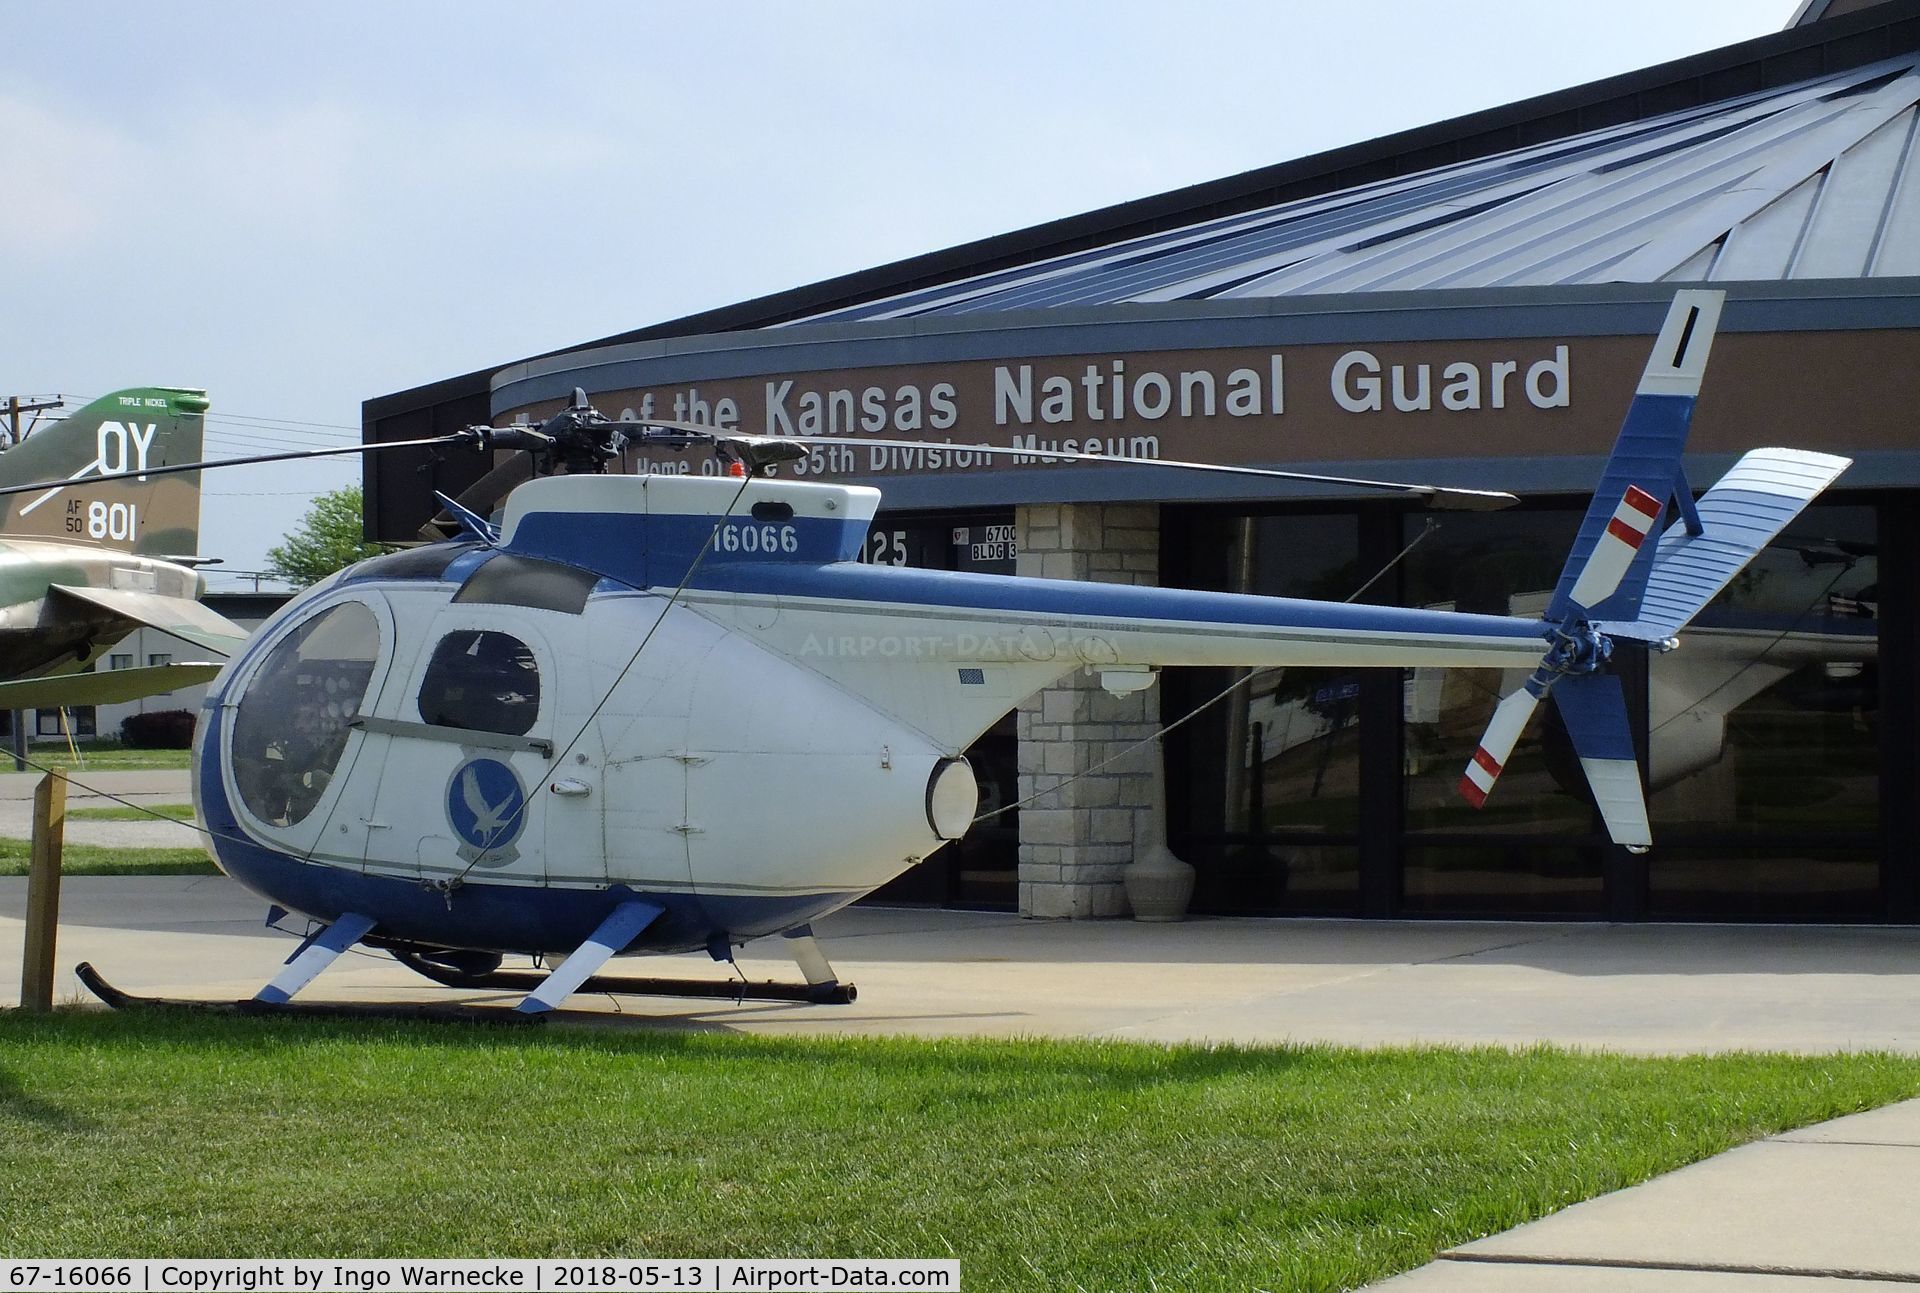 67-16066, 1967 Hughes OH-6A Cayuse C/N 0451, Hughes OH-6A Cayuse at the Museum of the Kansas National Guard, Topeka KS